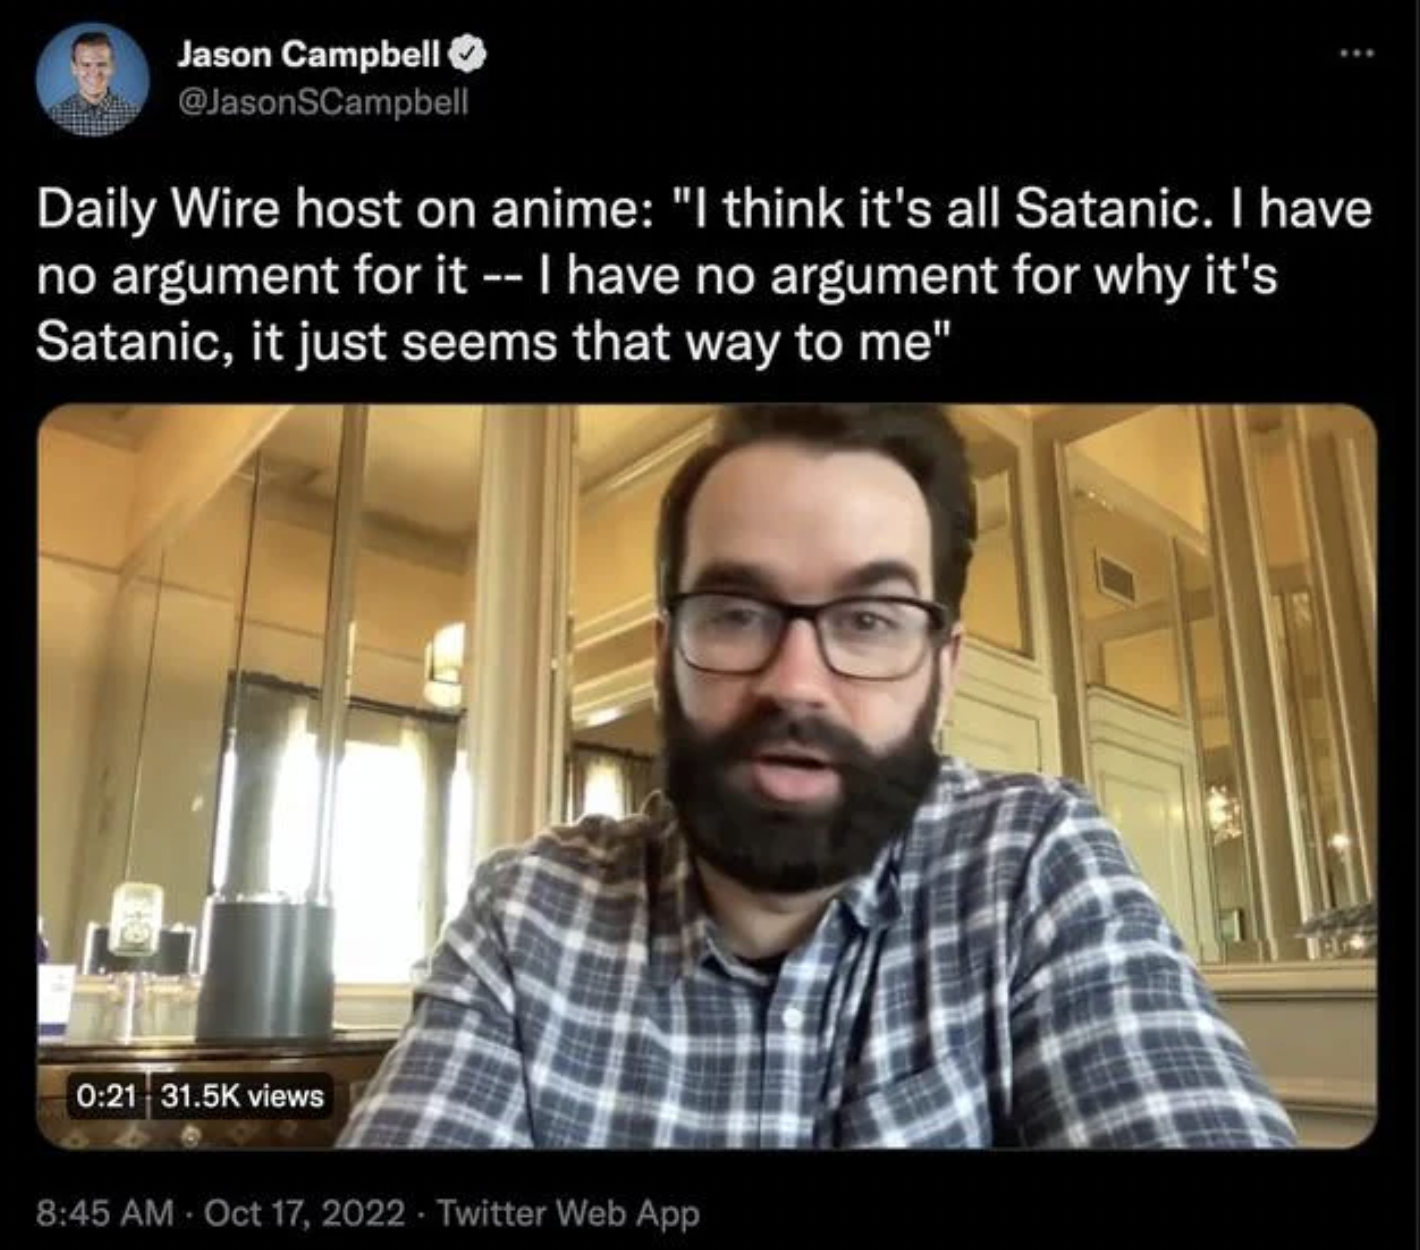 Crazy People of Facebook - video - Jason Campbell Daily Wire host on anime